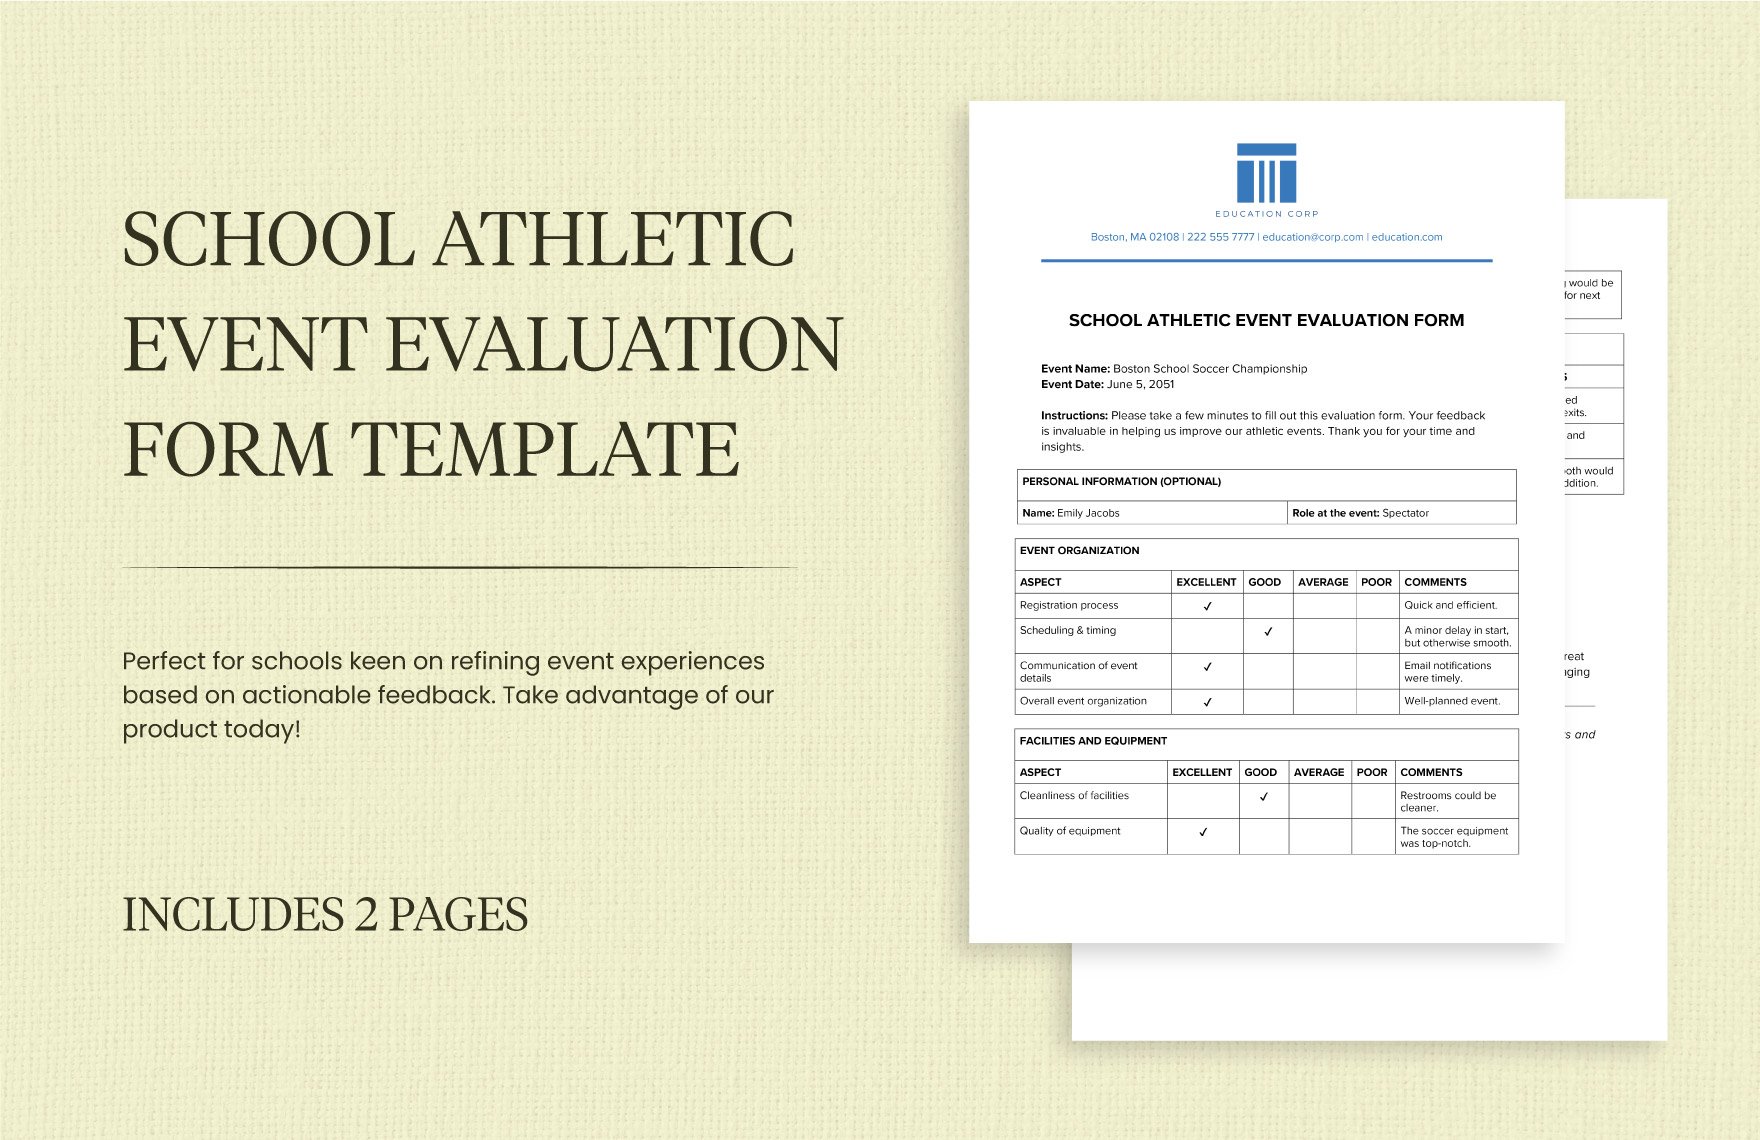 School Athletic Event Evaluation Form Template in Word, Google Docs, PDF